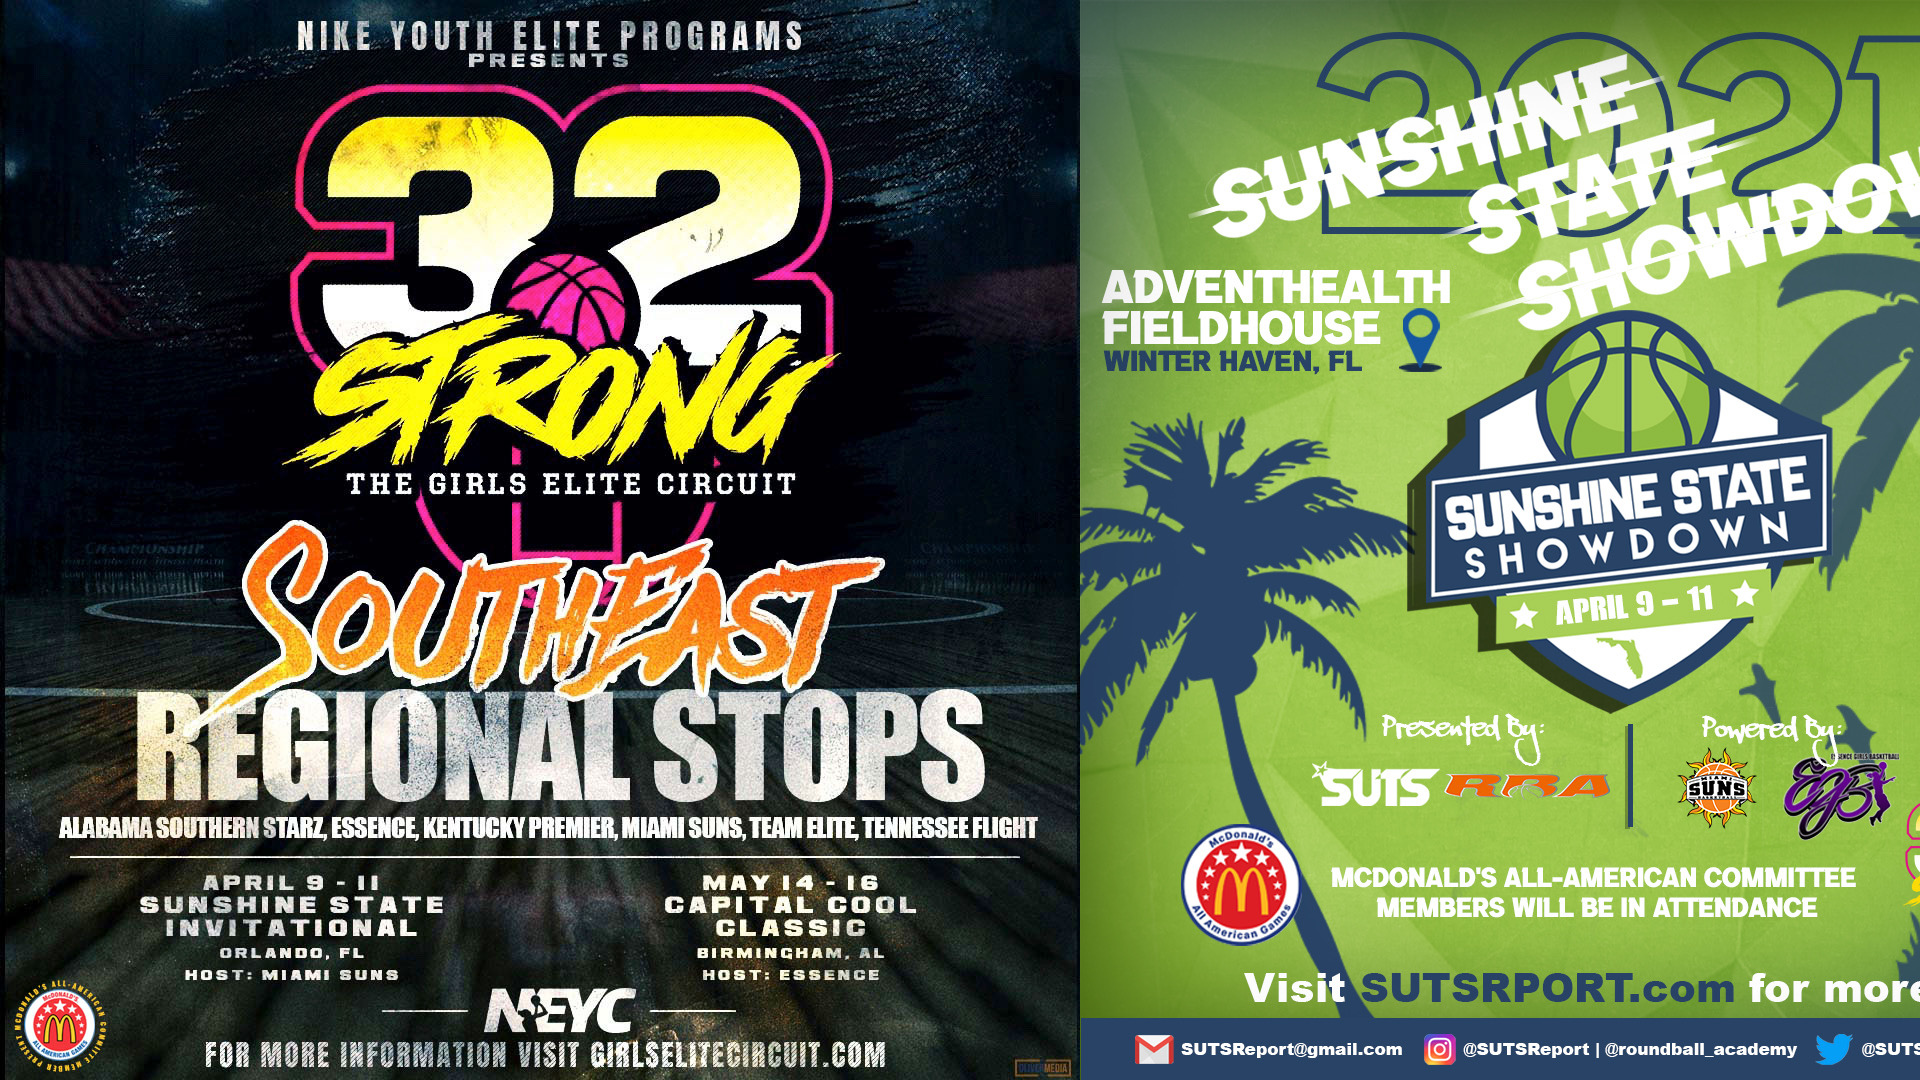 Sunshine State Showdown Joins 32-Strong Event Series